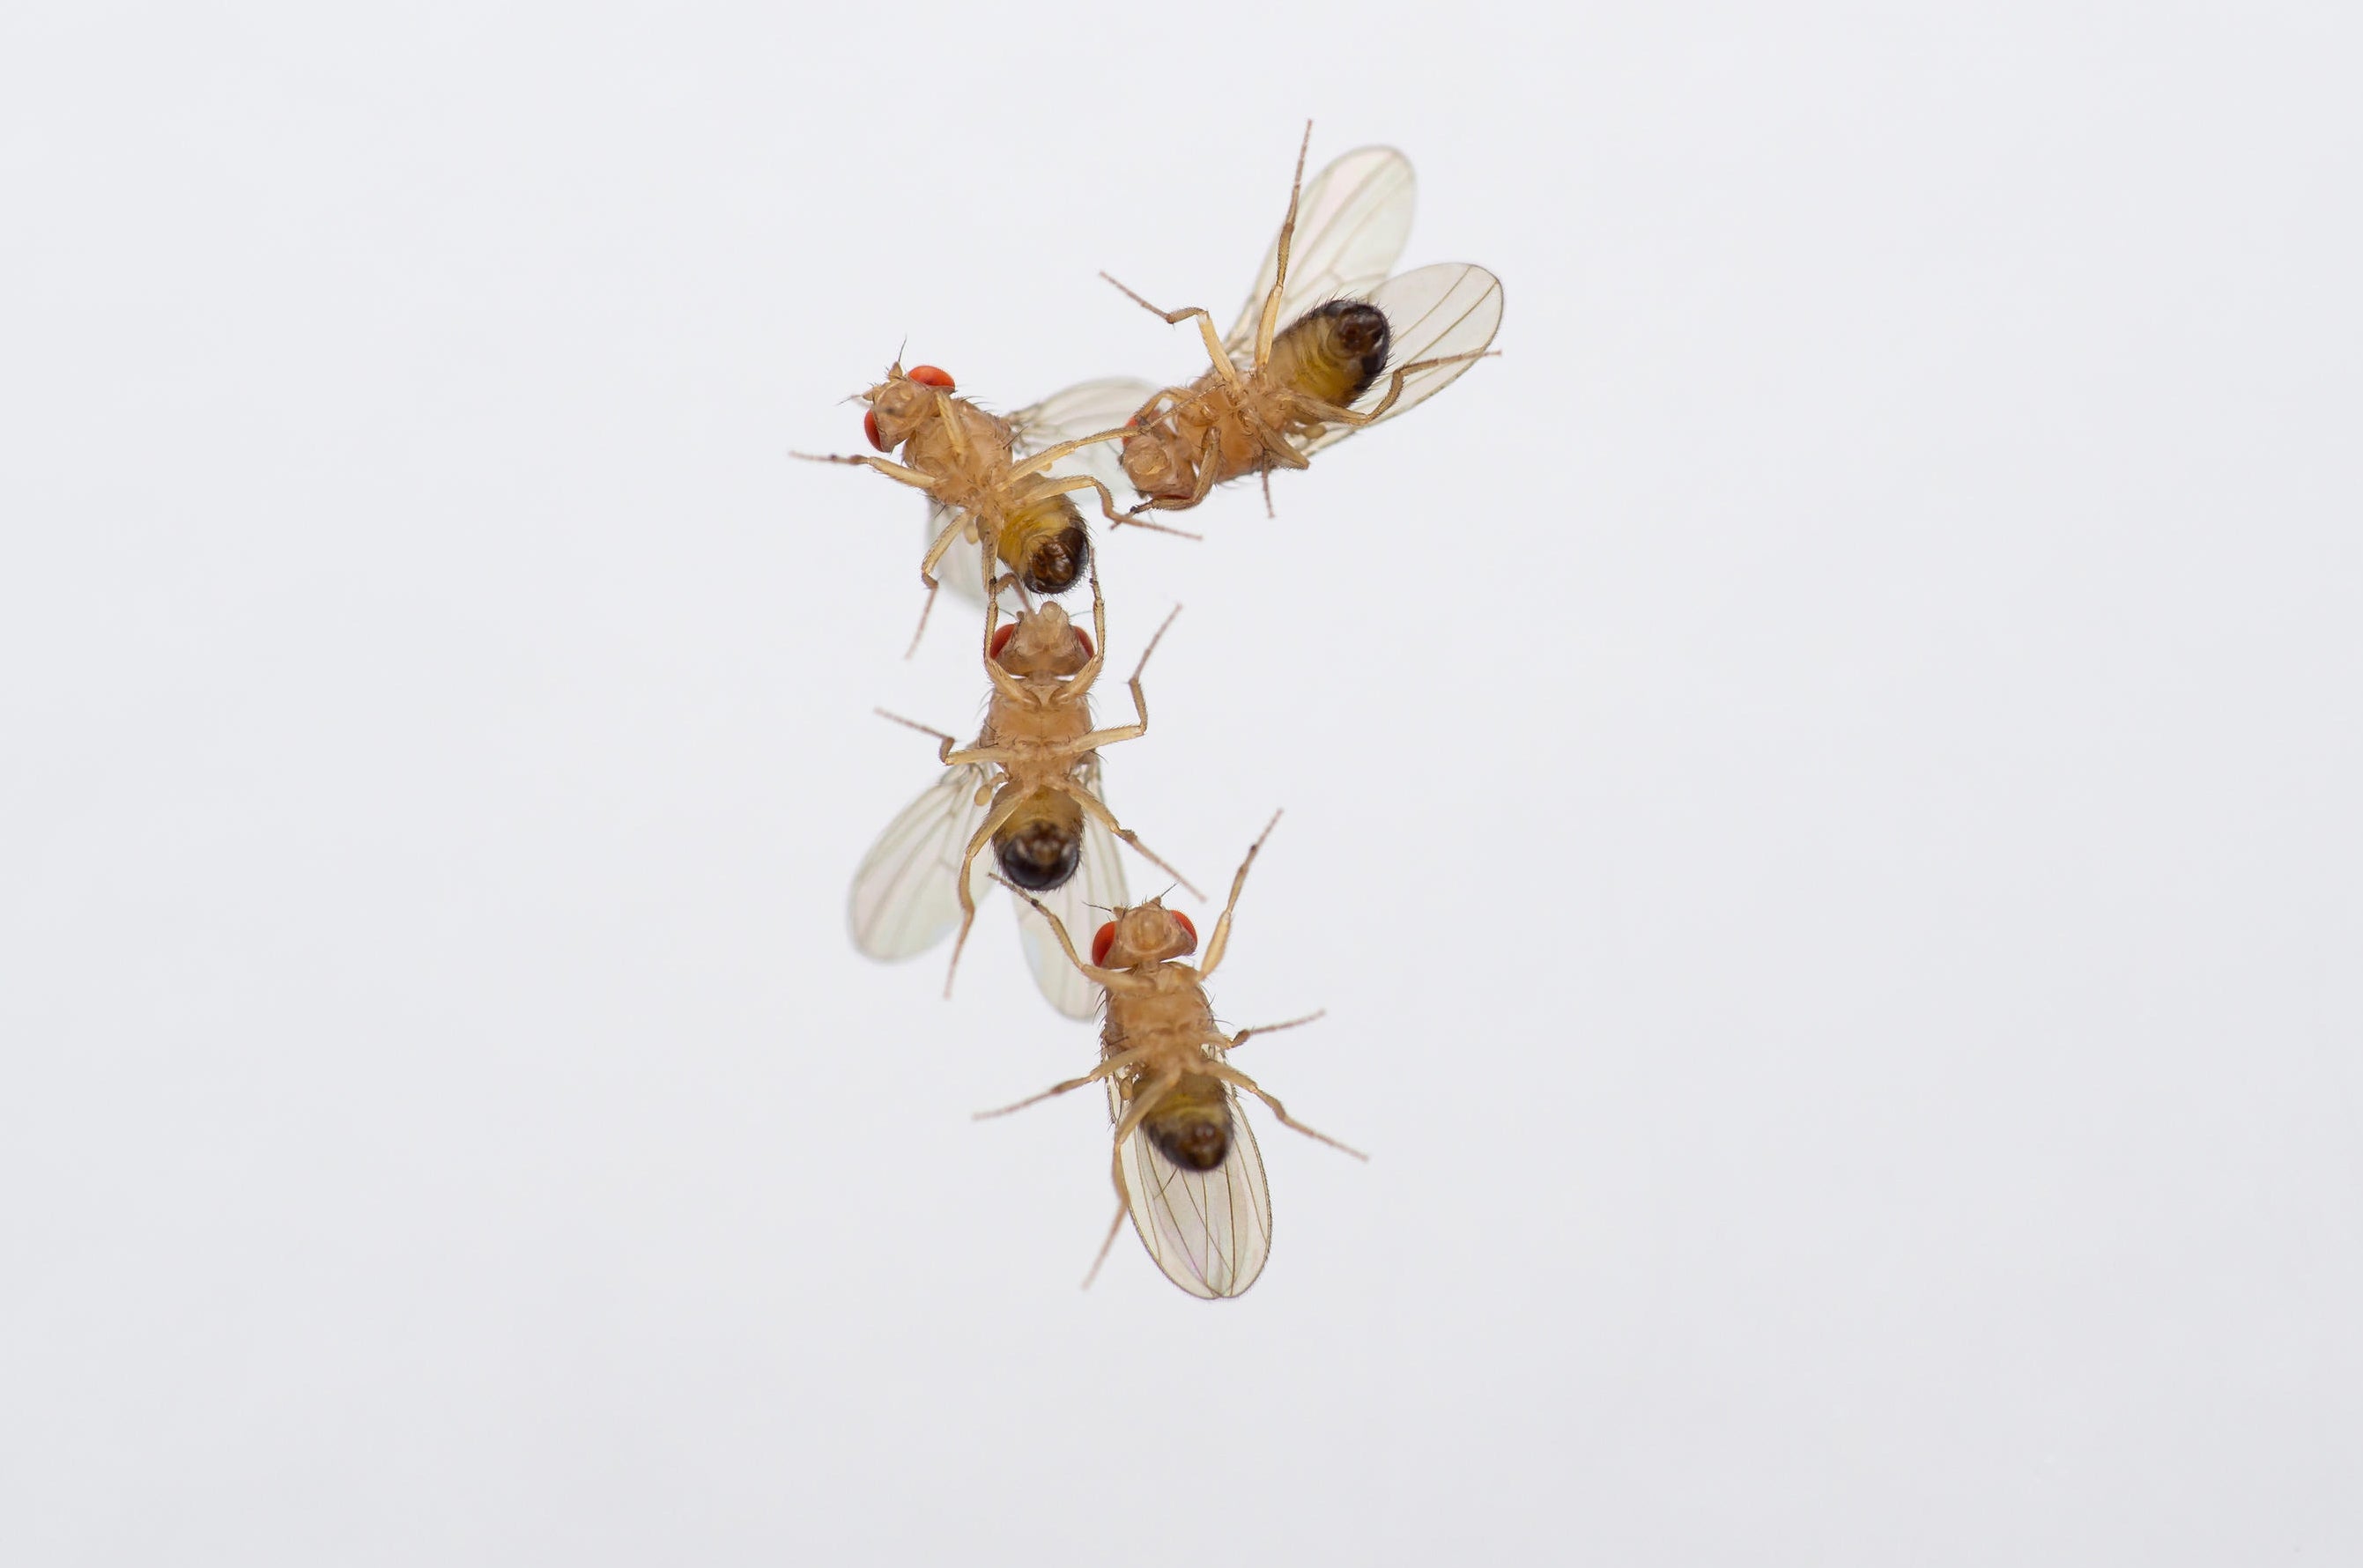 Photo issued by Max Planck Institute for Chemical Ecology of four male fruit flies attempting to court each other